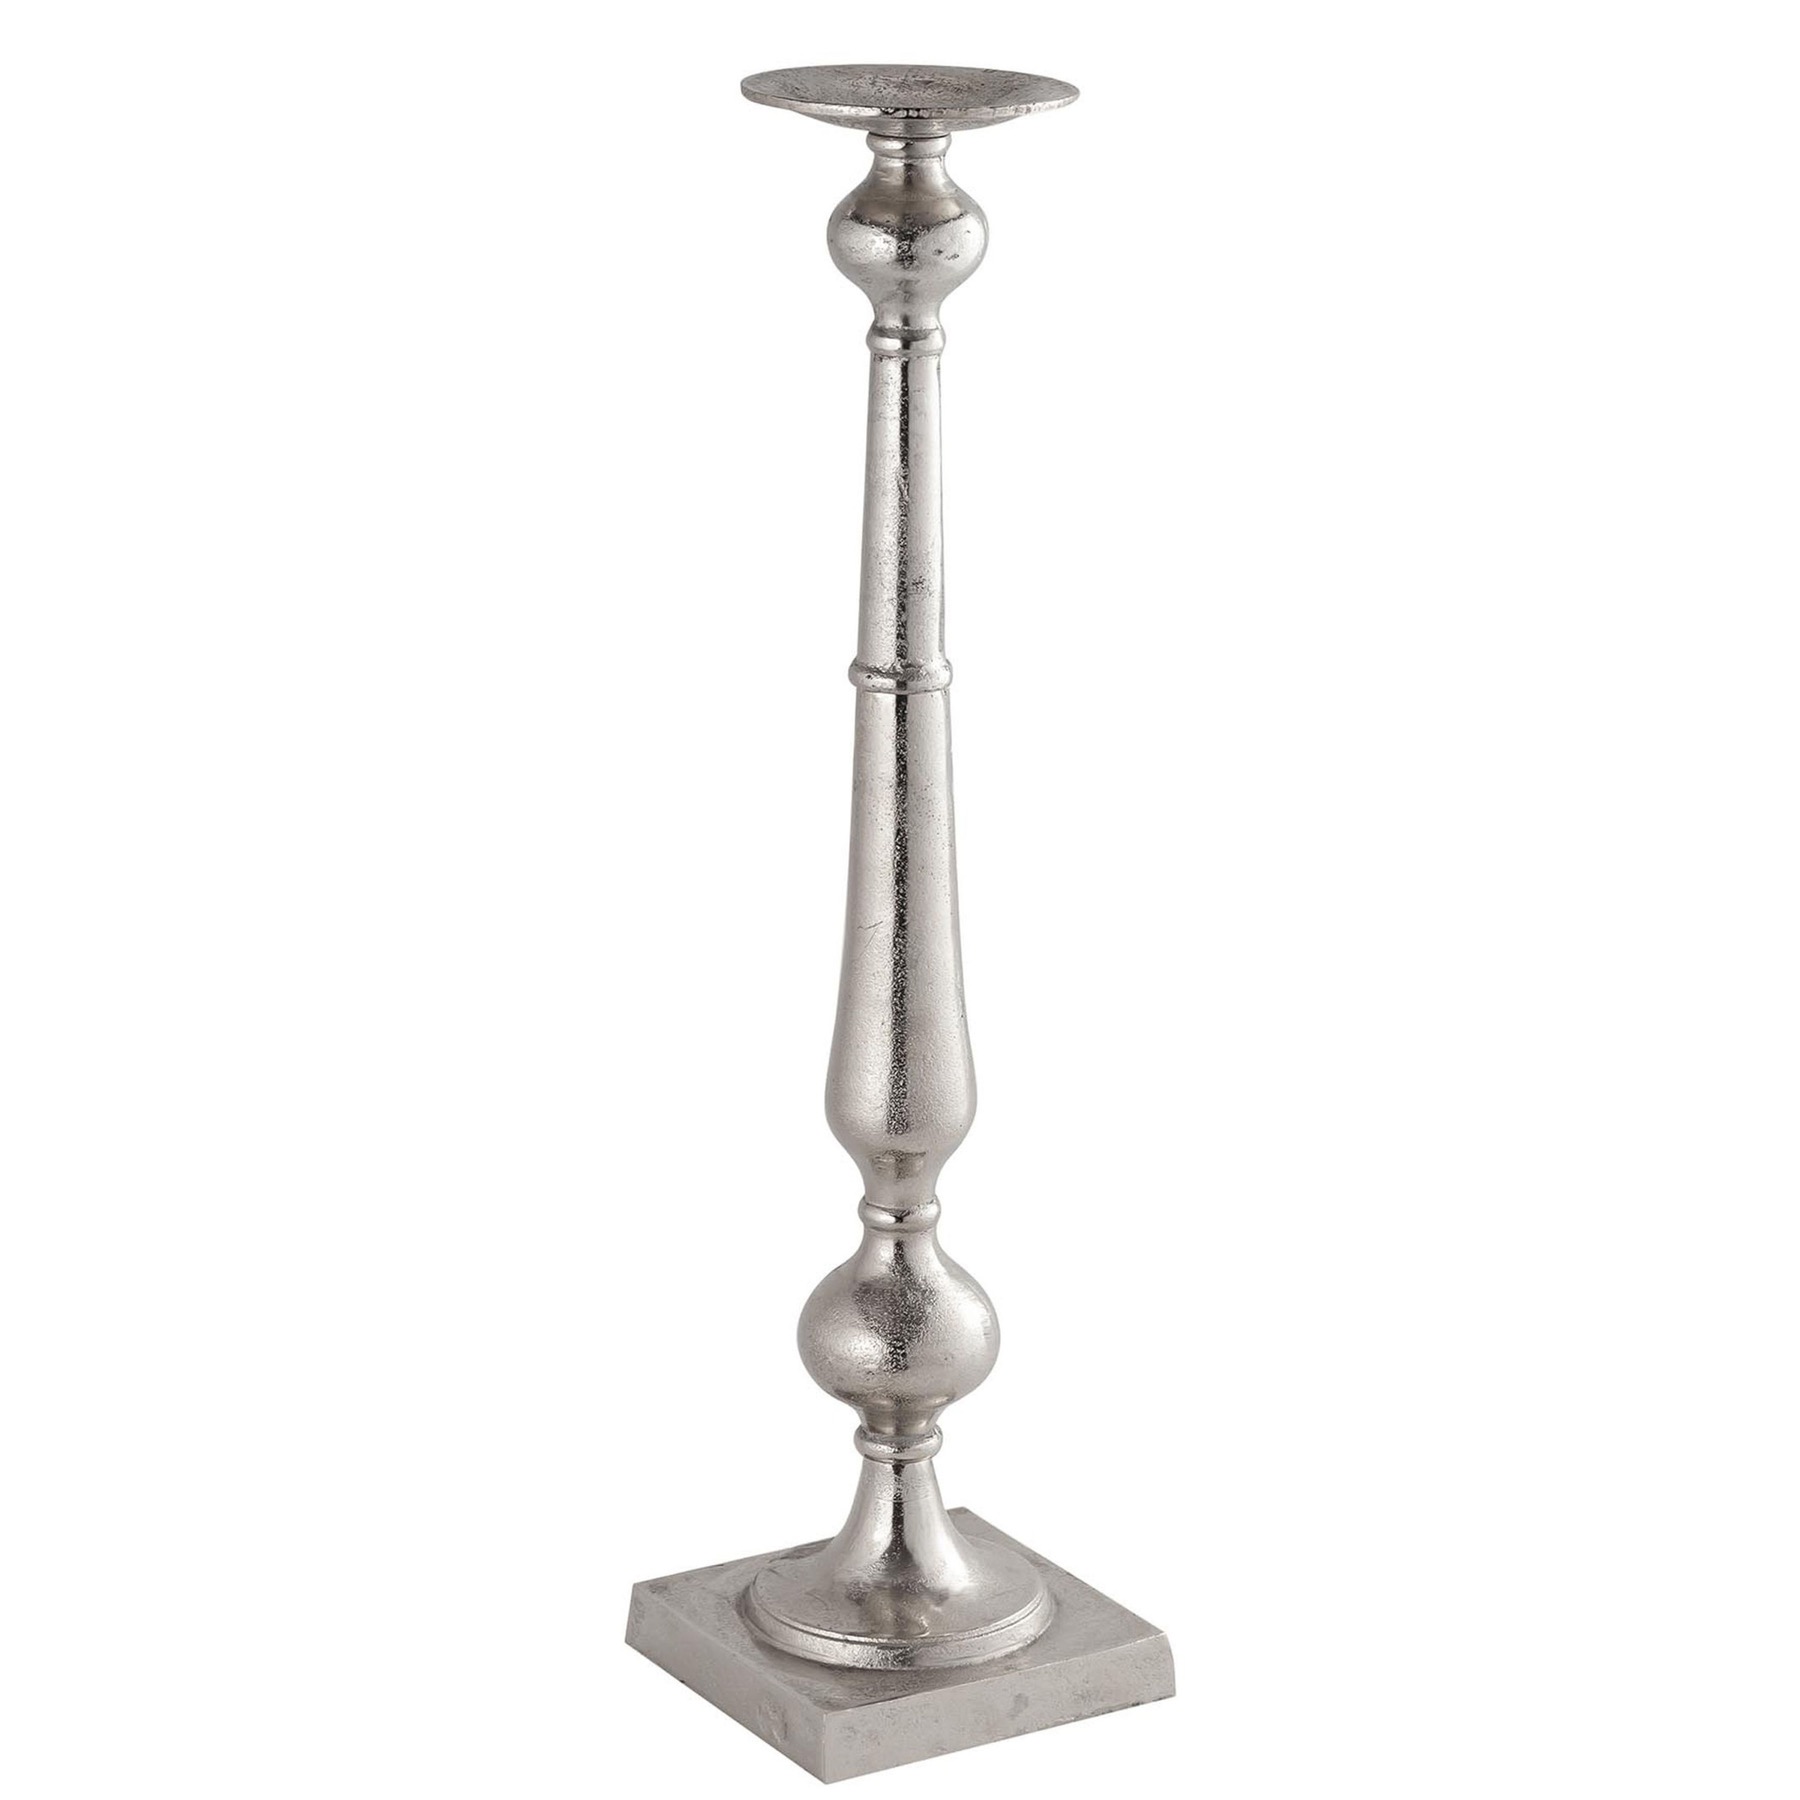 Farrah Collection Silver Tall Dinner Candle Holder - Image 1